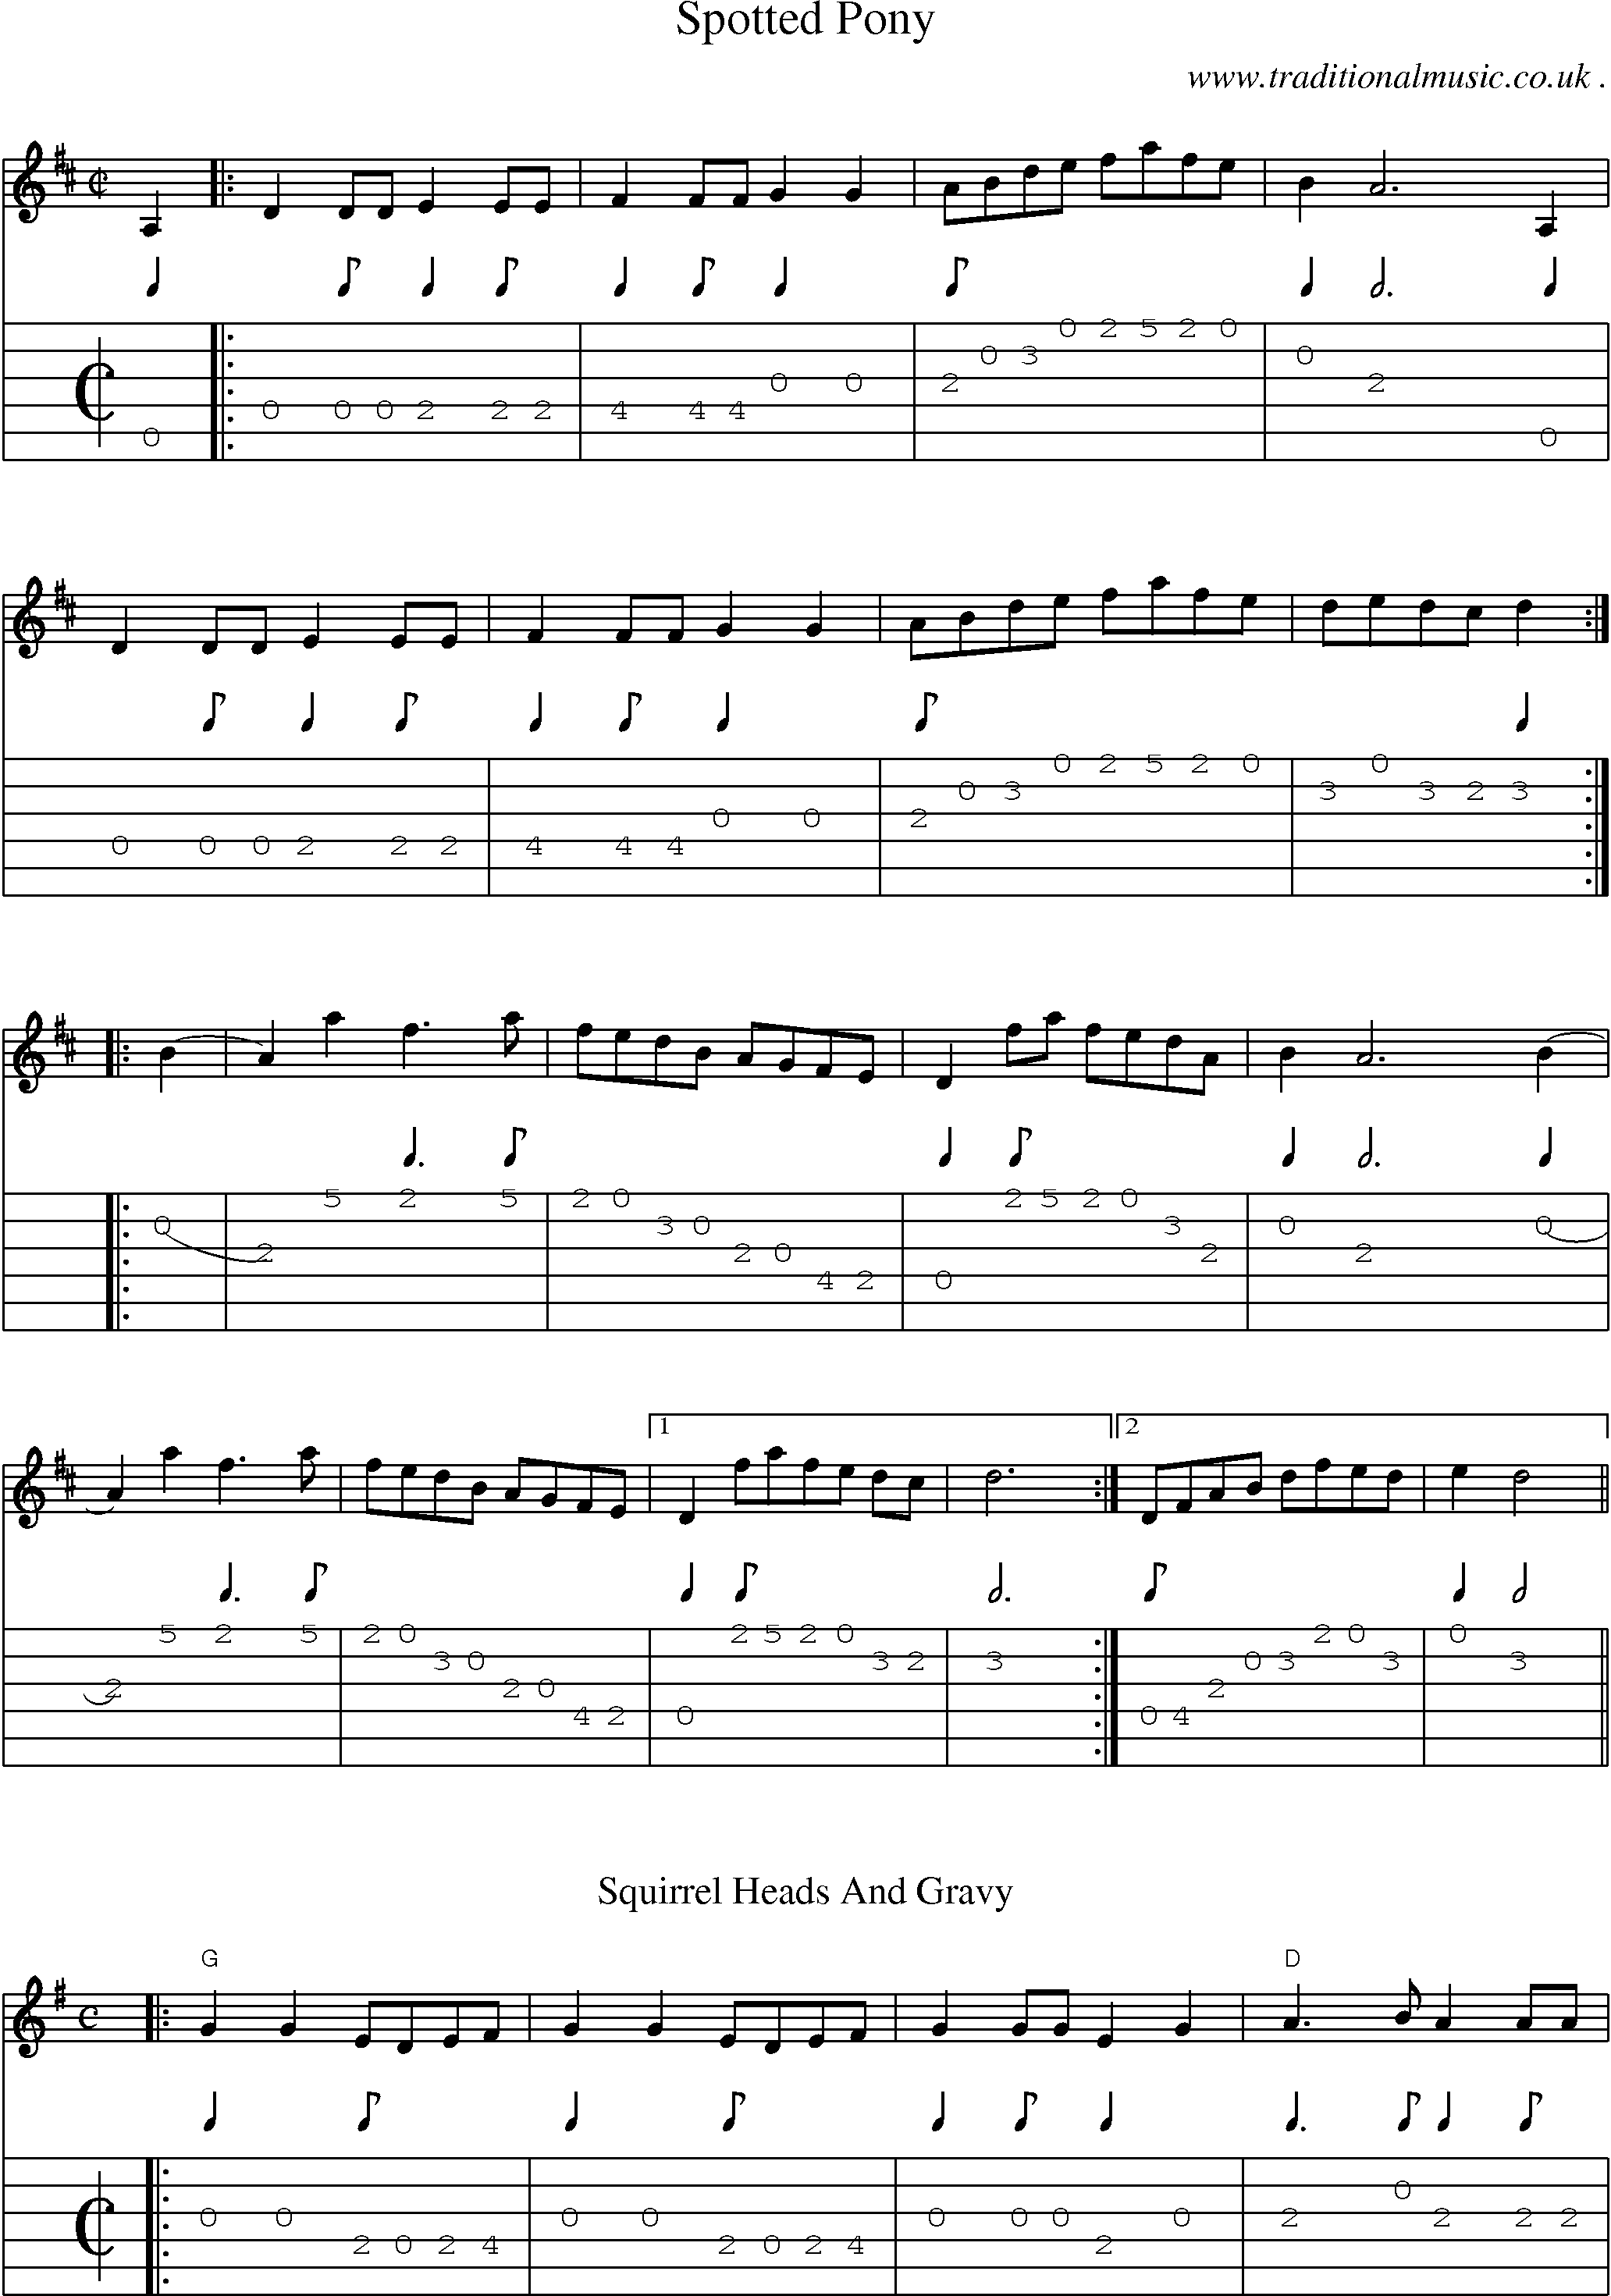 Music Score and Guitar Tabs for Spotted Pony